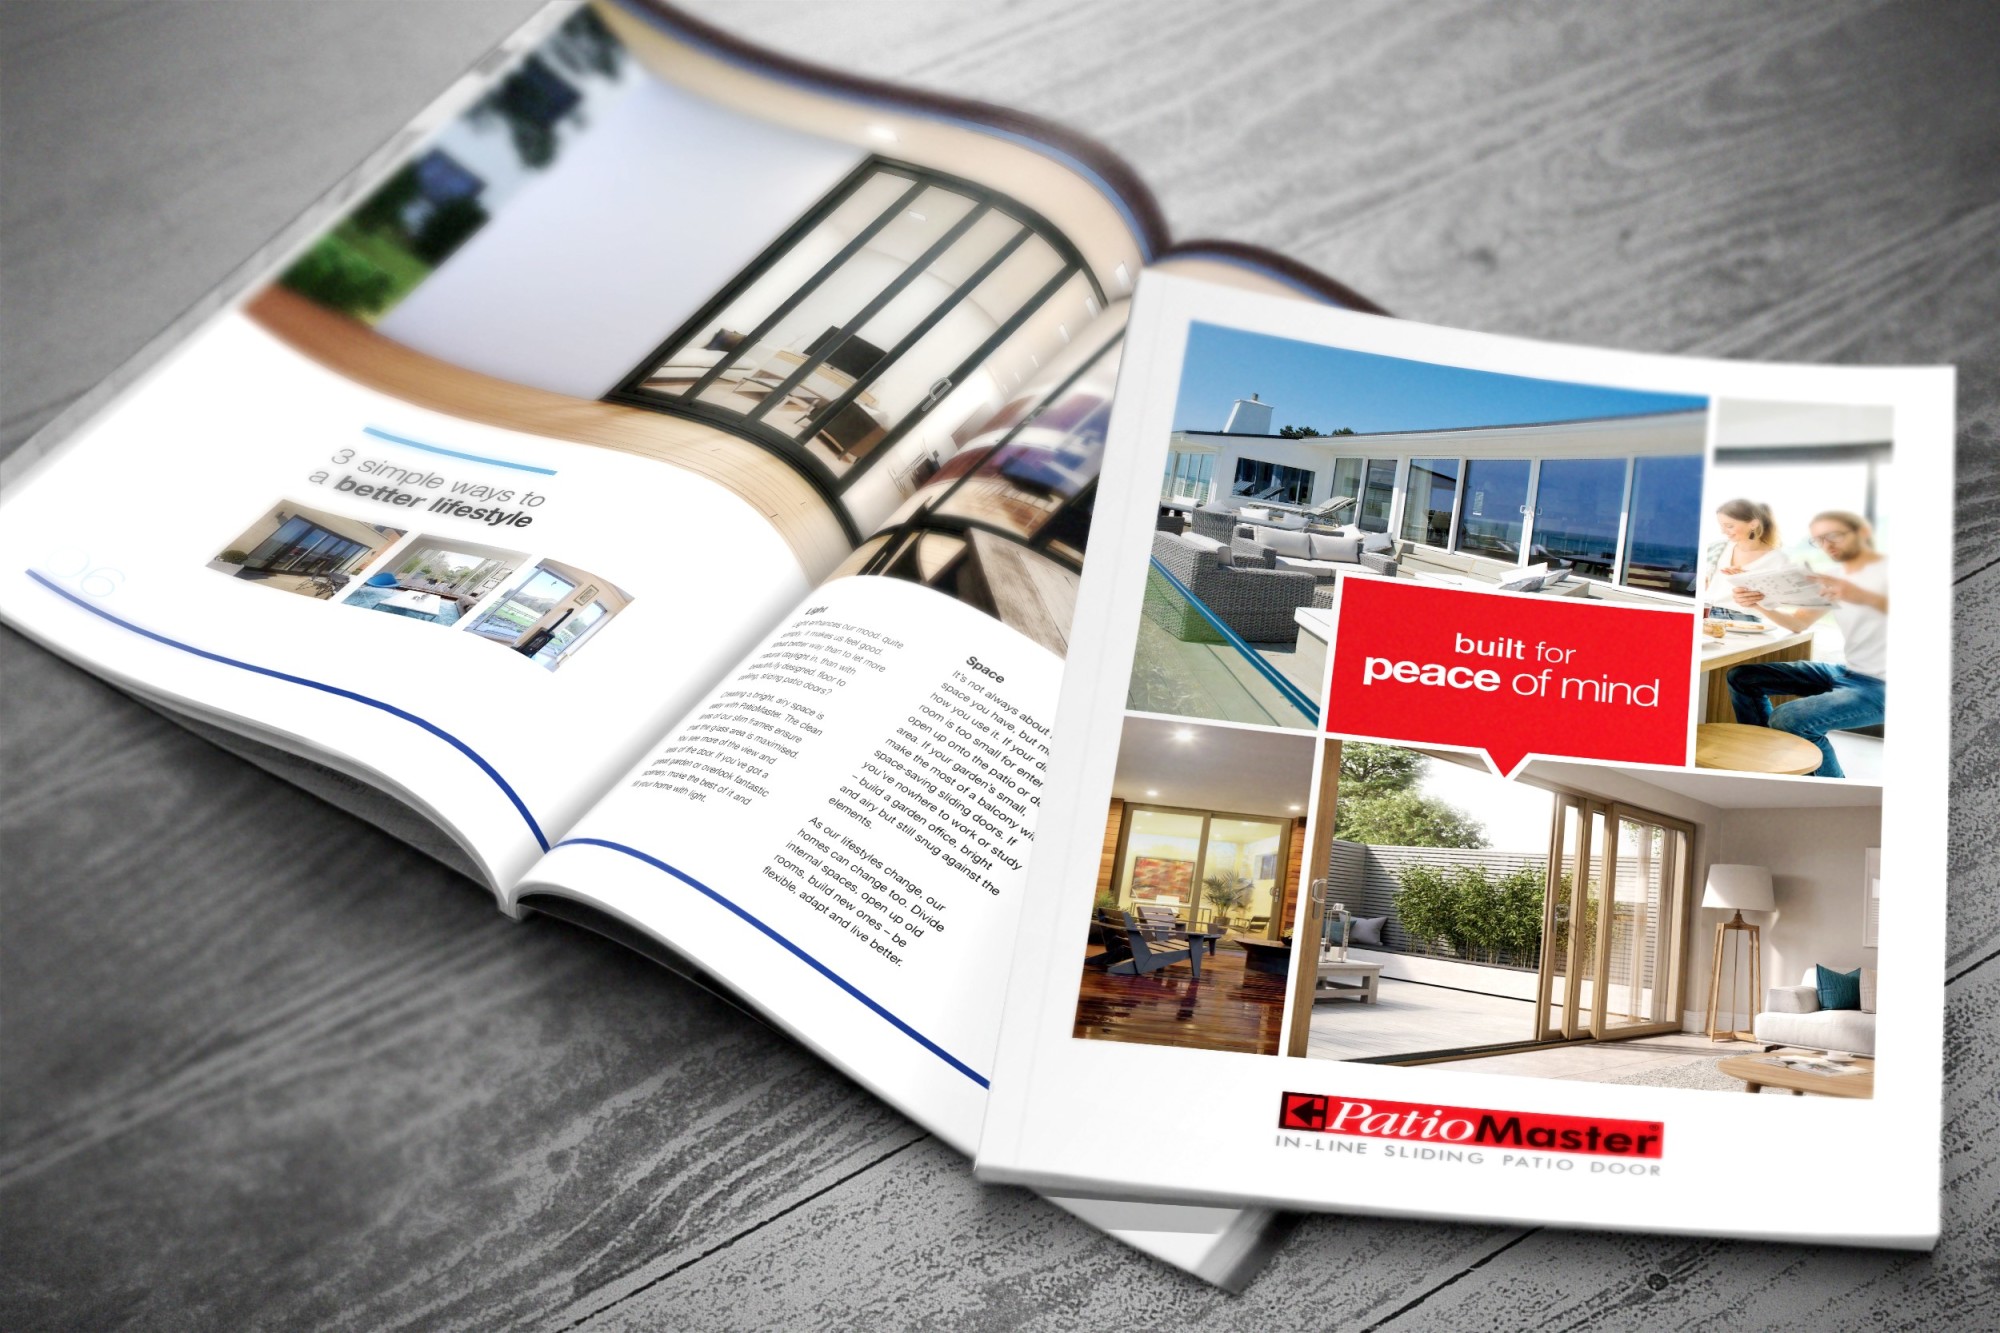 The new PatioMaster retail brochure